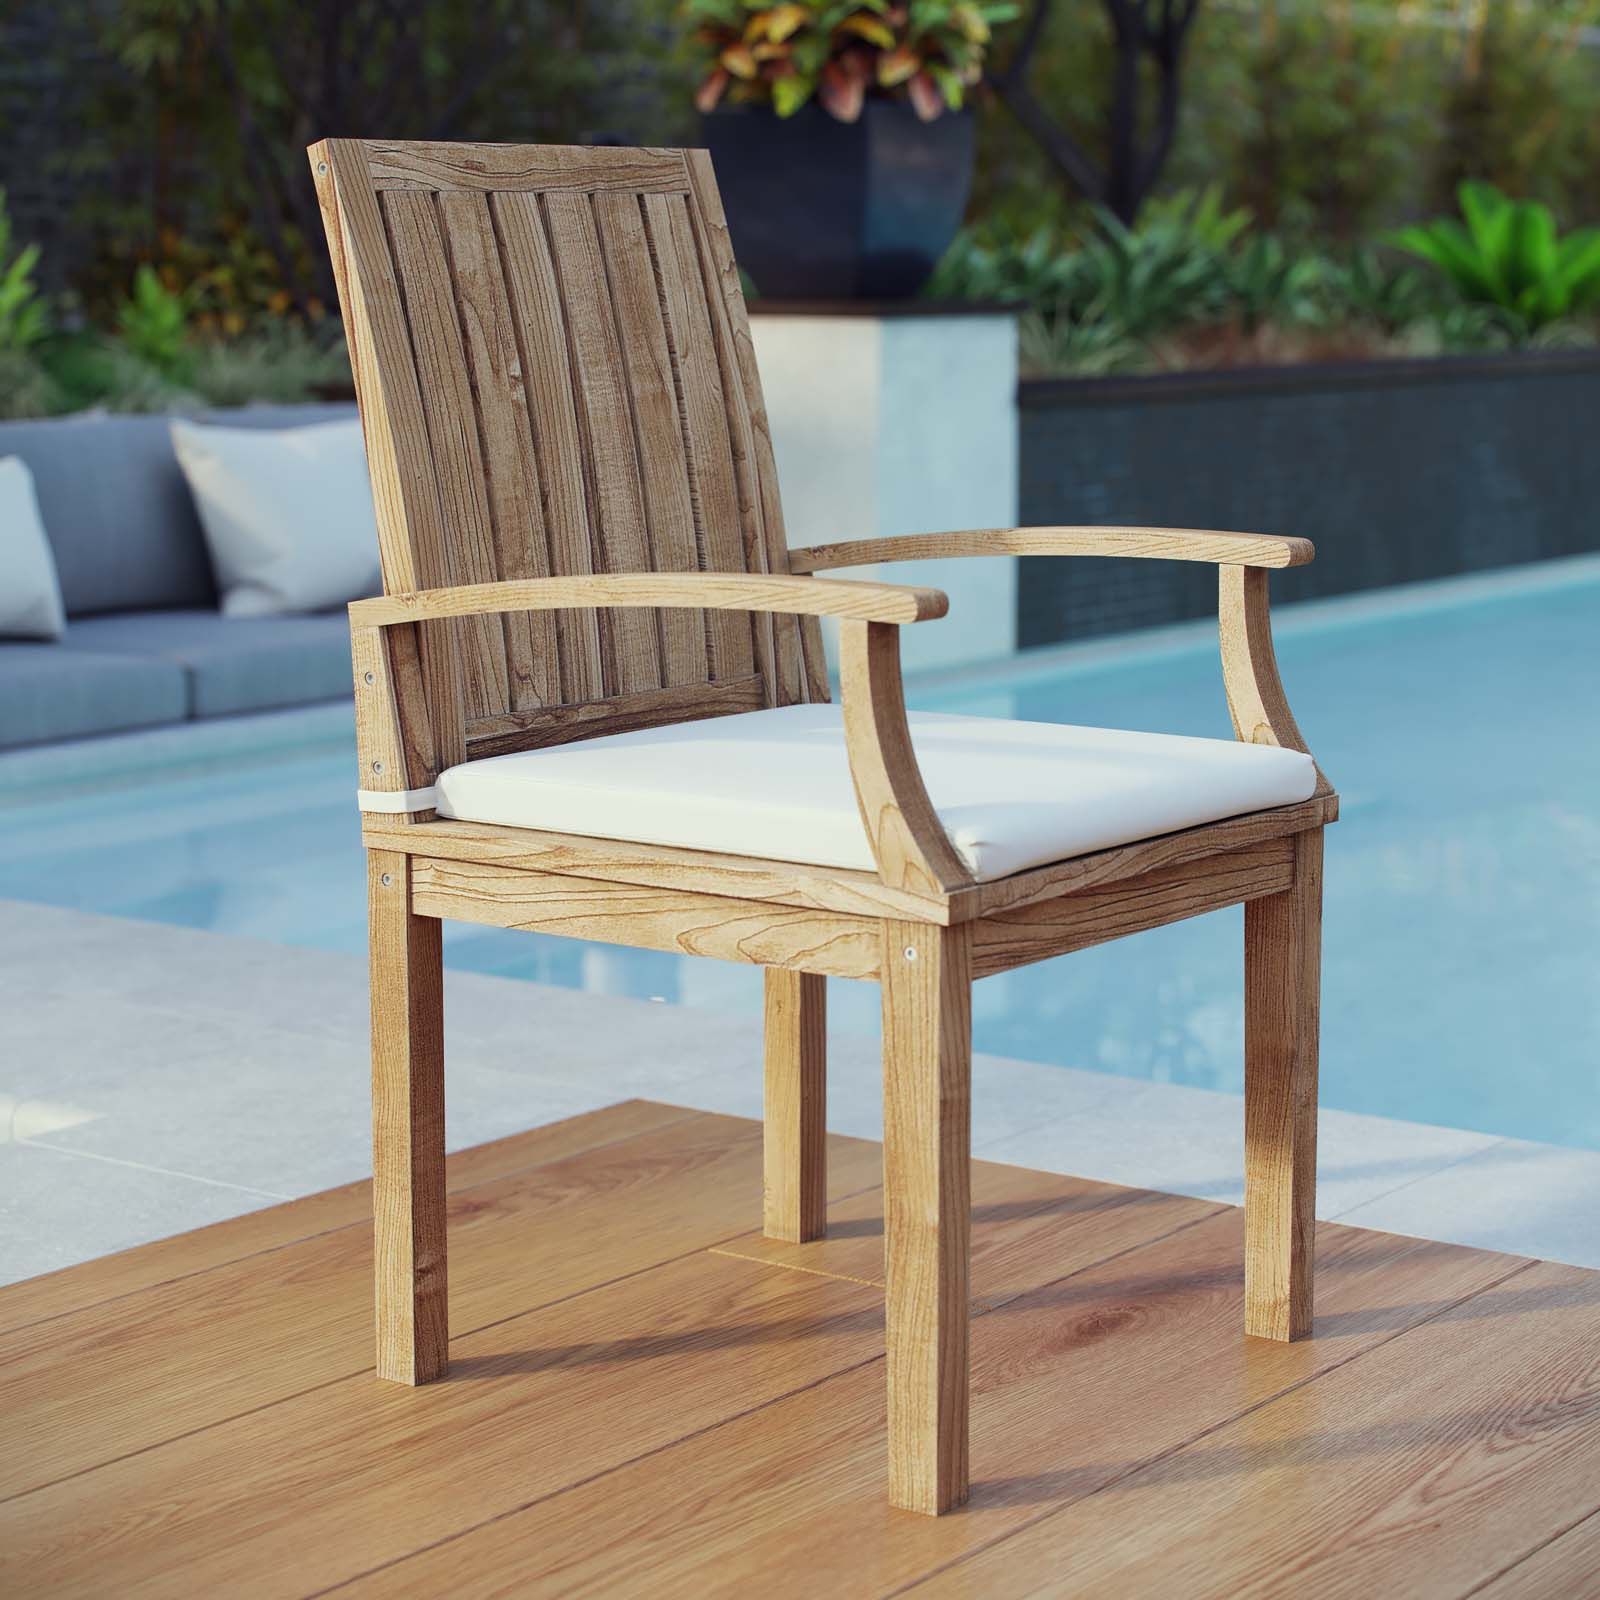 Natural Wood Outdoor Chairs With Widely Used Modterior :: Outdoor :: Outdoor Chairs :: Marina Outdoor Patio Teak (View 2 of 15)